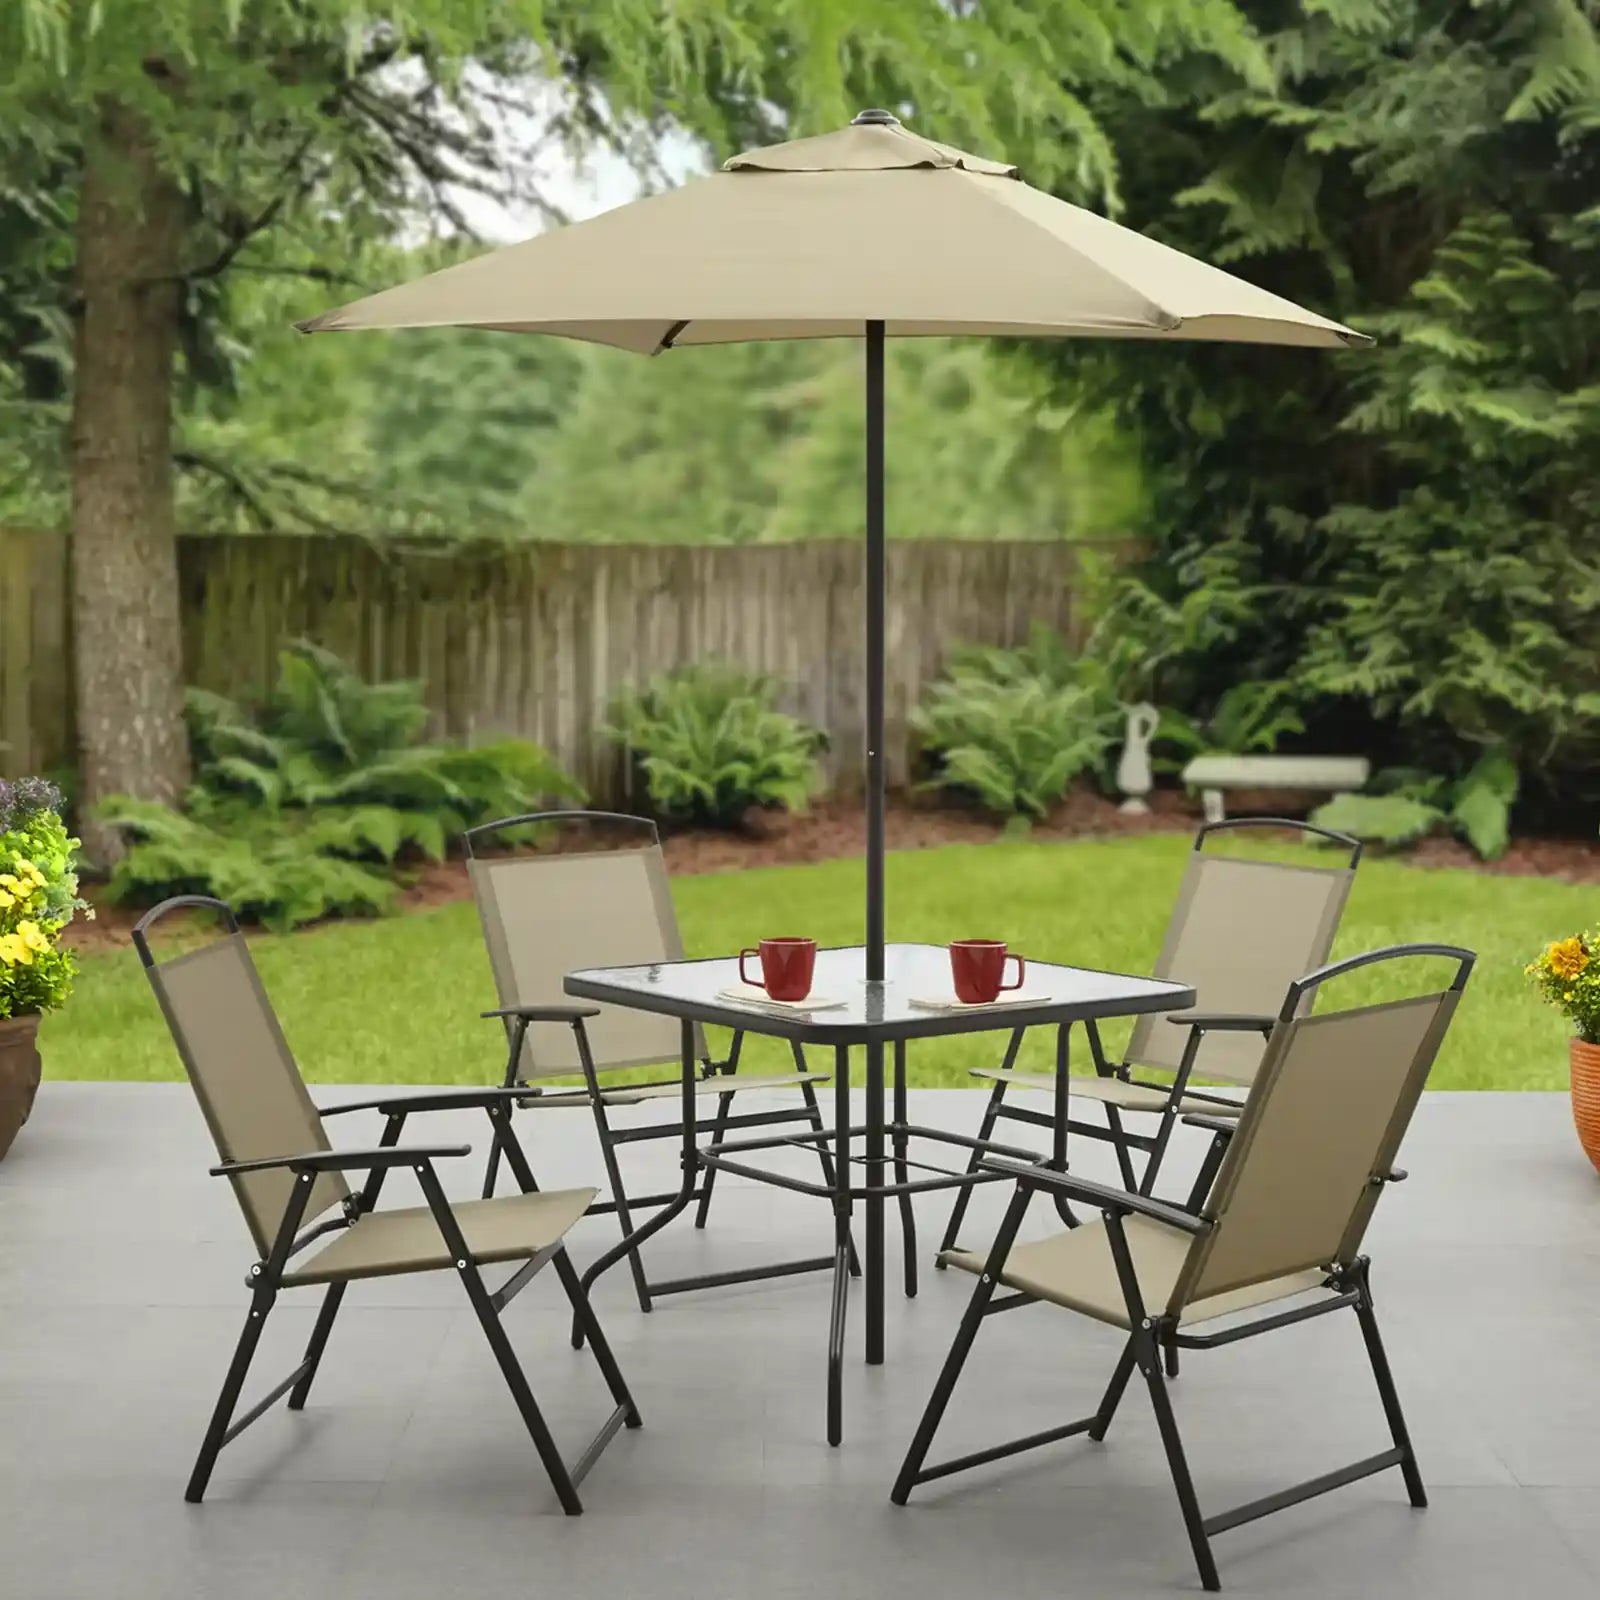 Outdoor Patio Dining Set, Dining Table ,Chairs and Umbrella